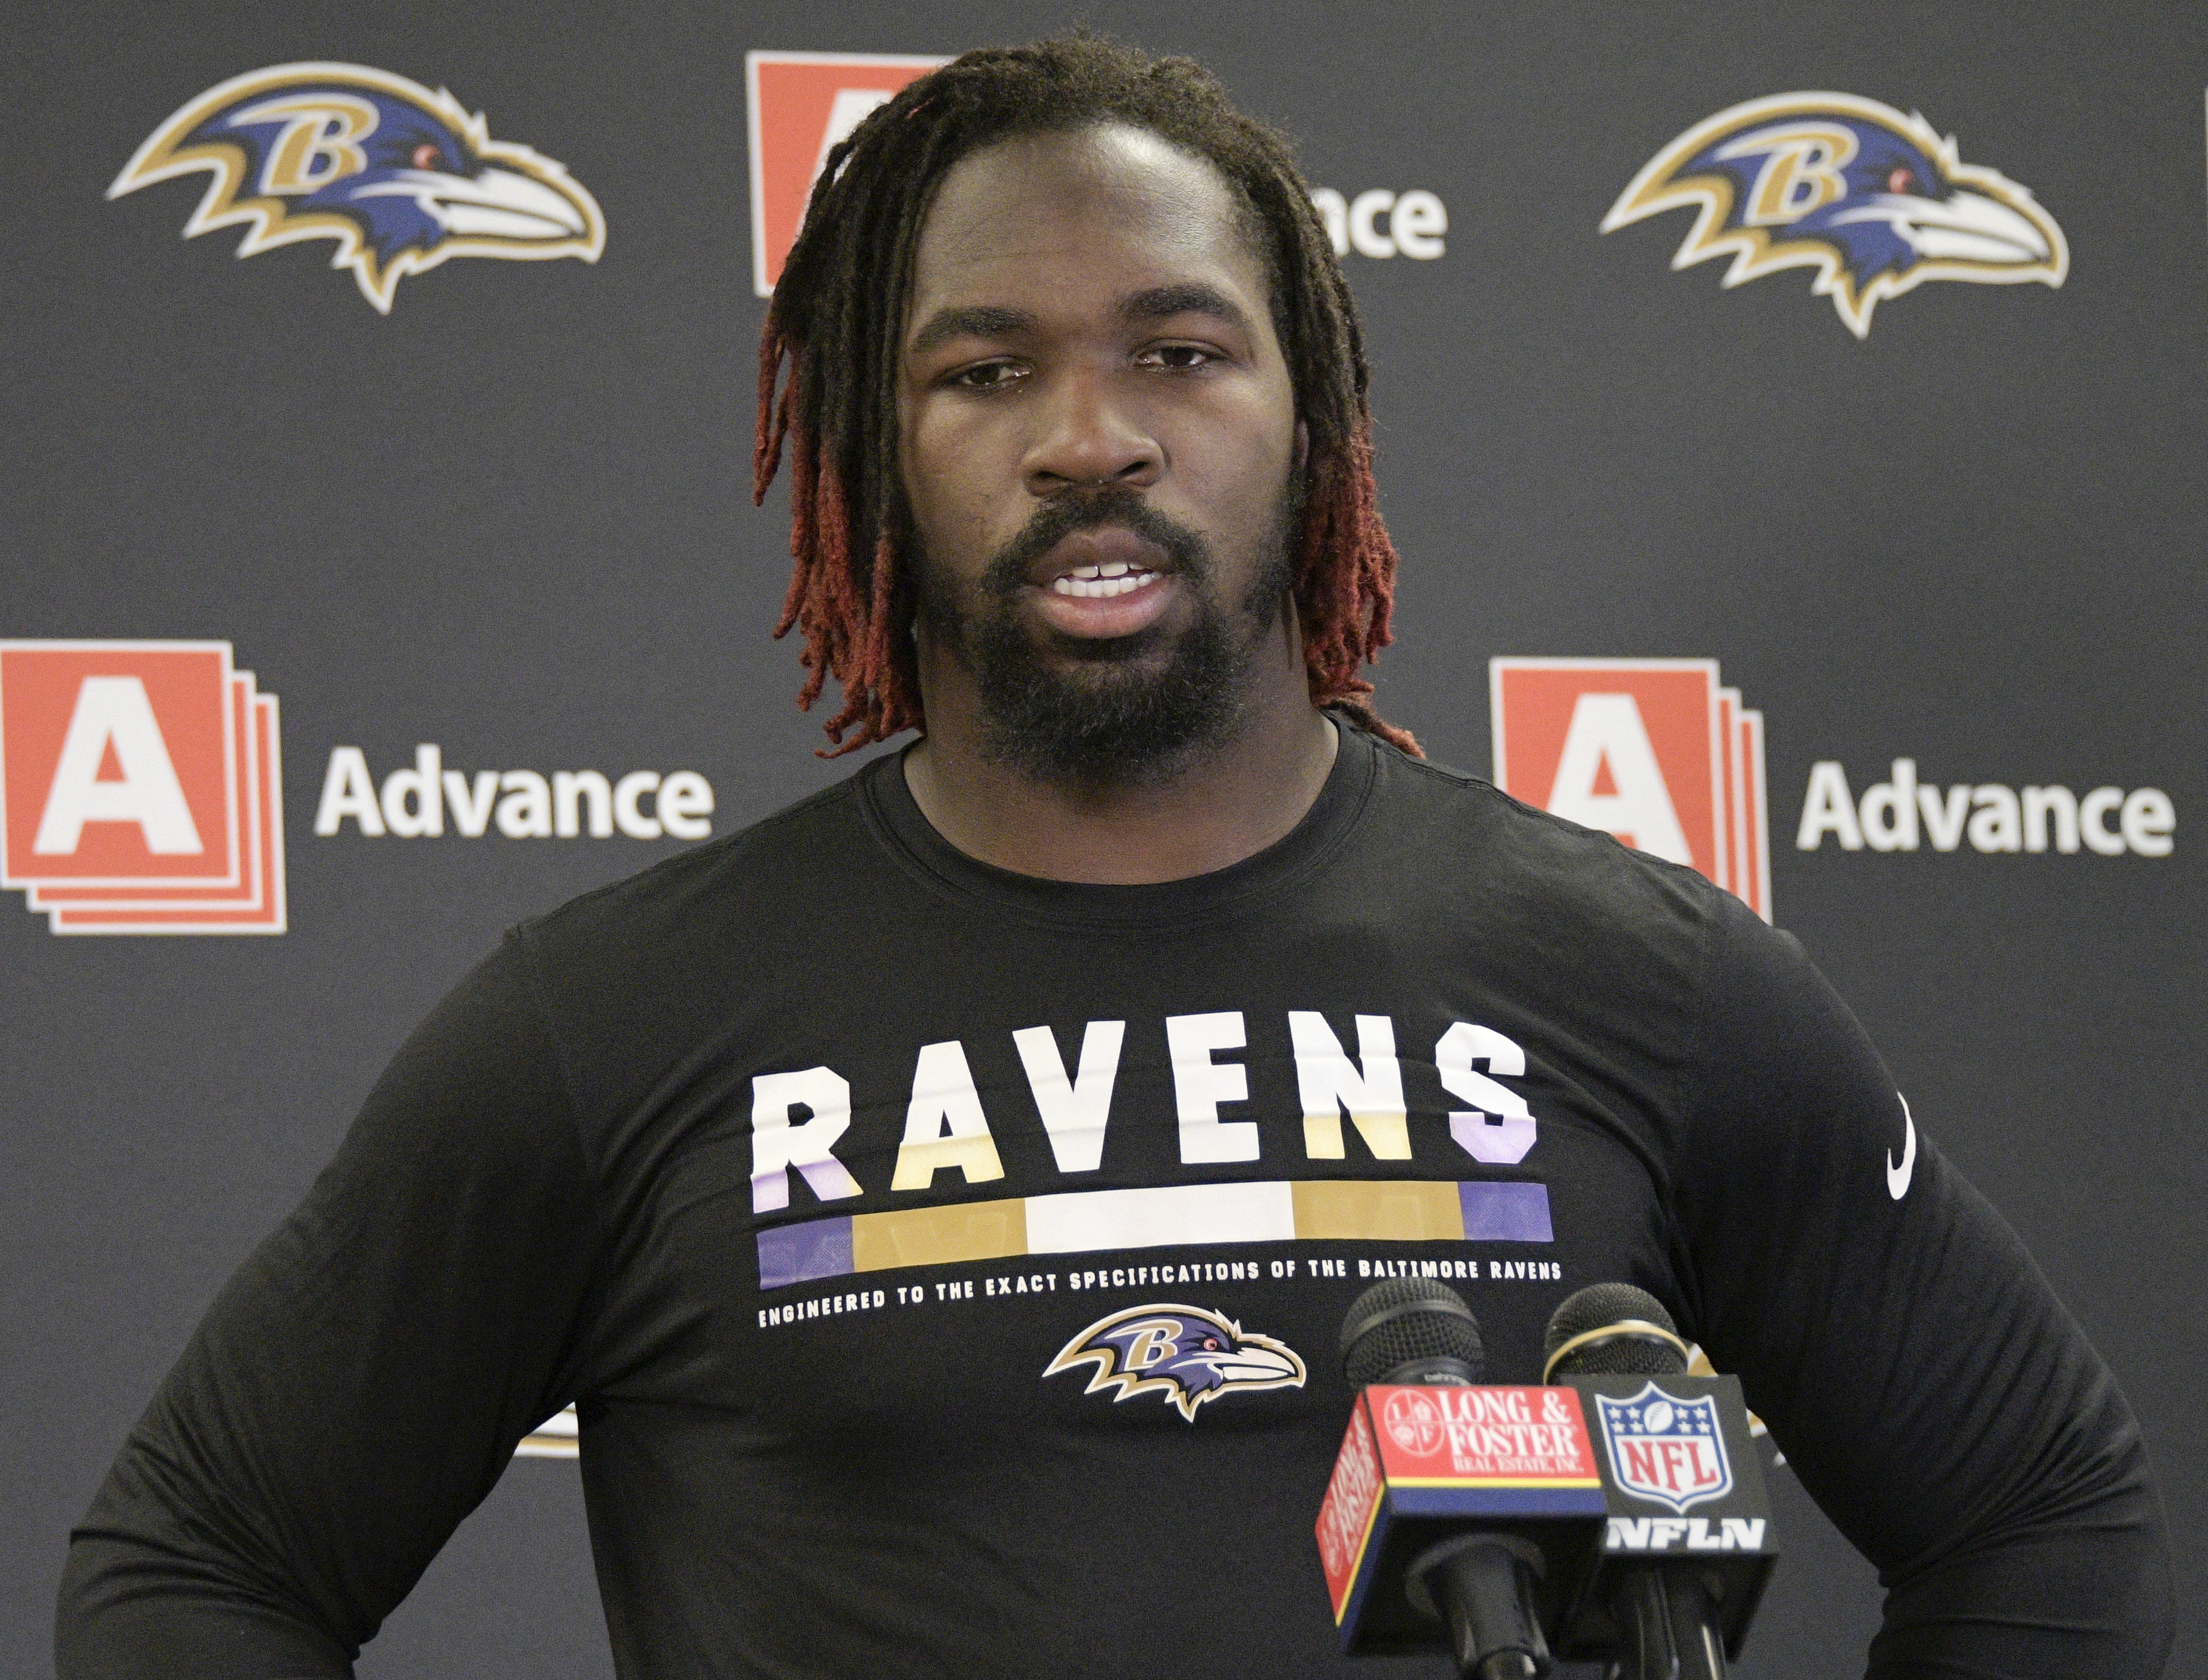 Ravens not counting on having LB Mosley vs Broncos on Sunday